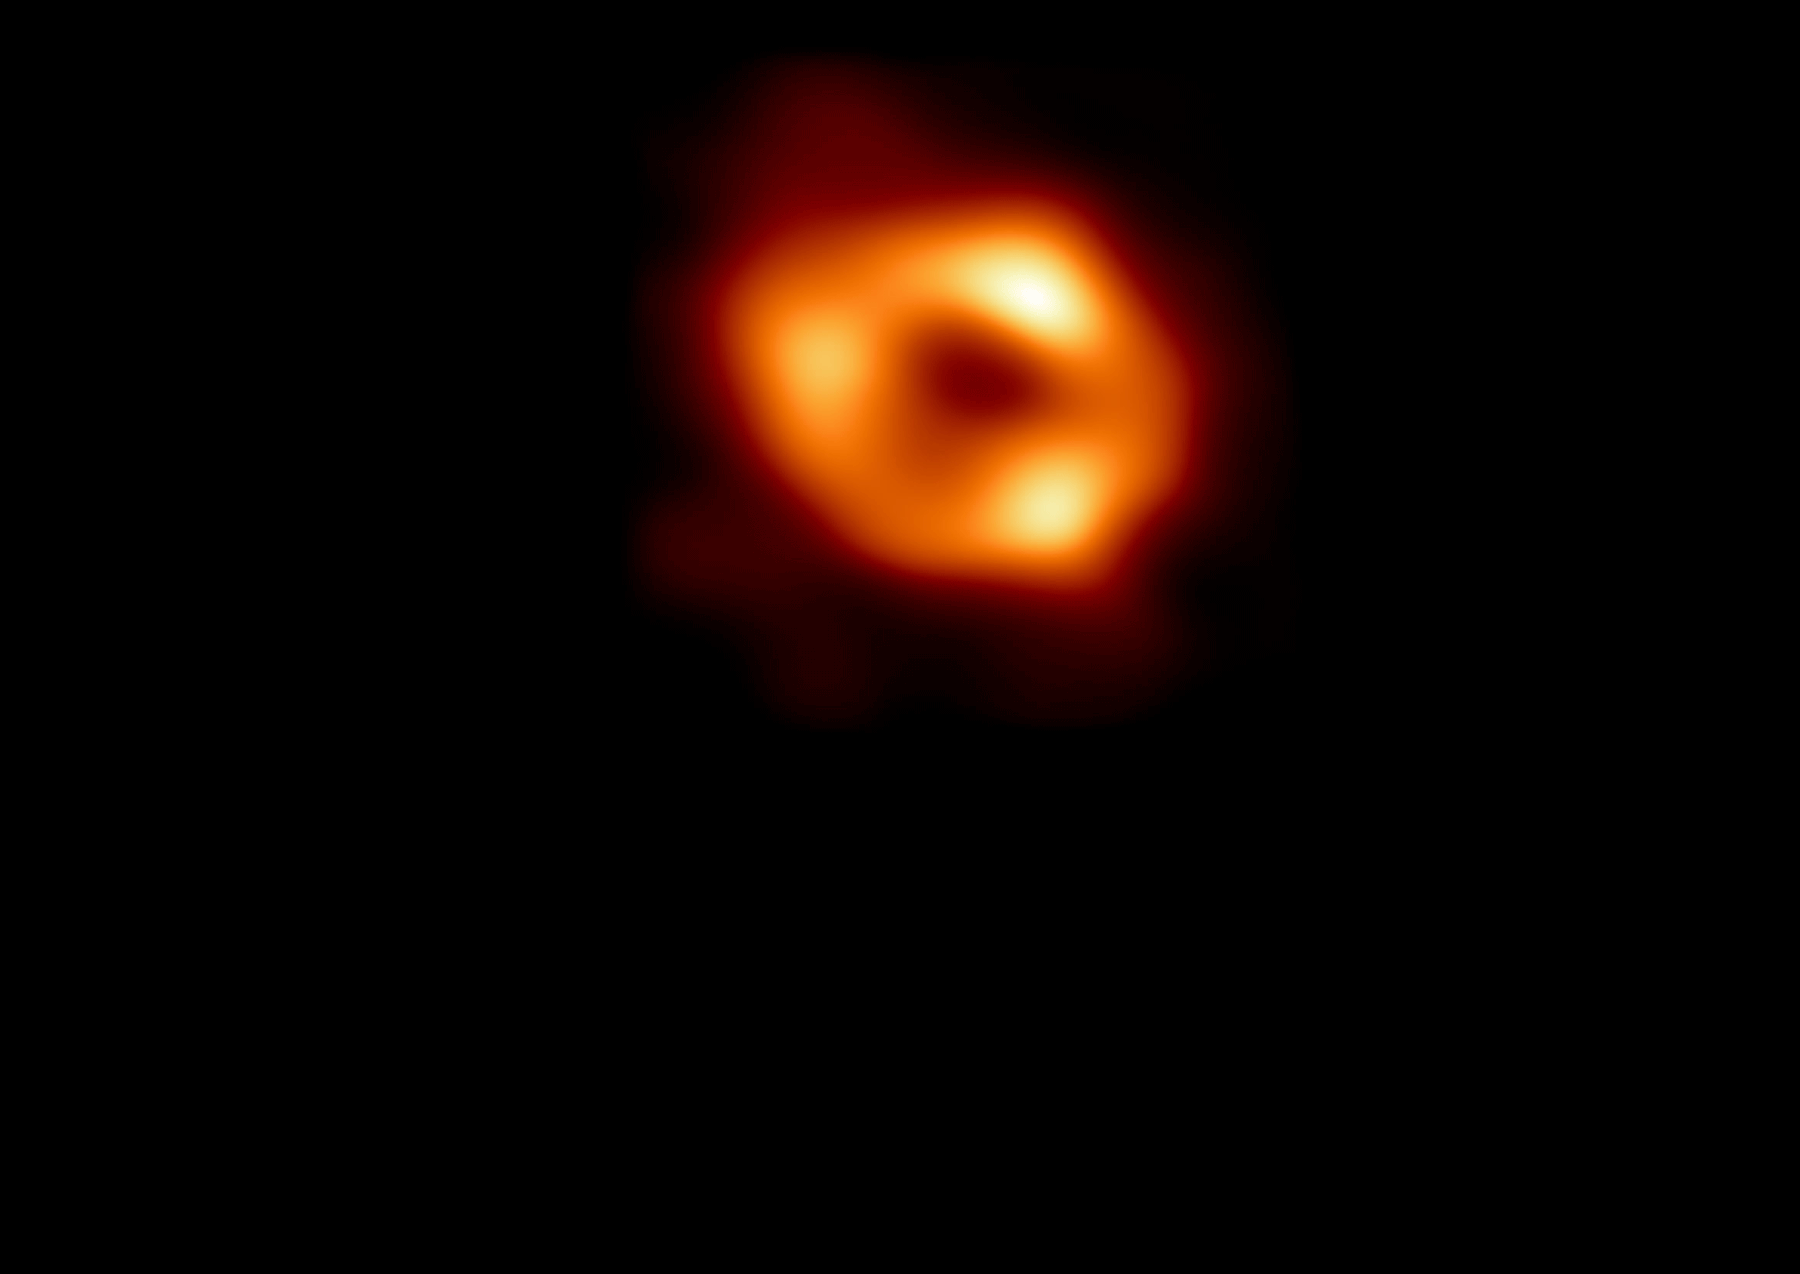 Physics professor Charles Gammie and his team contributed to research that produced the first direct visual evidence of the Sagittarius A star, the supermassive black hole at the center of the Milky Way galaxy.  Image courtesy Event Horizon Telescope collaboration